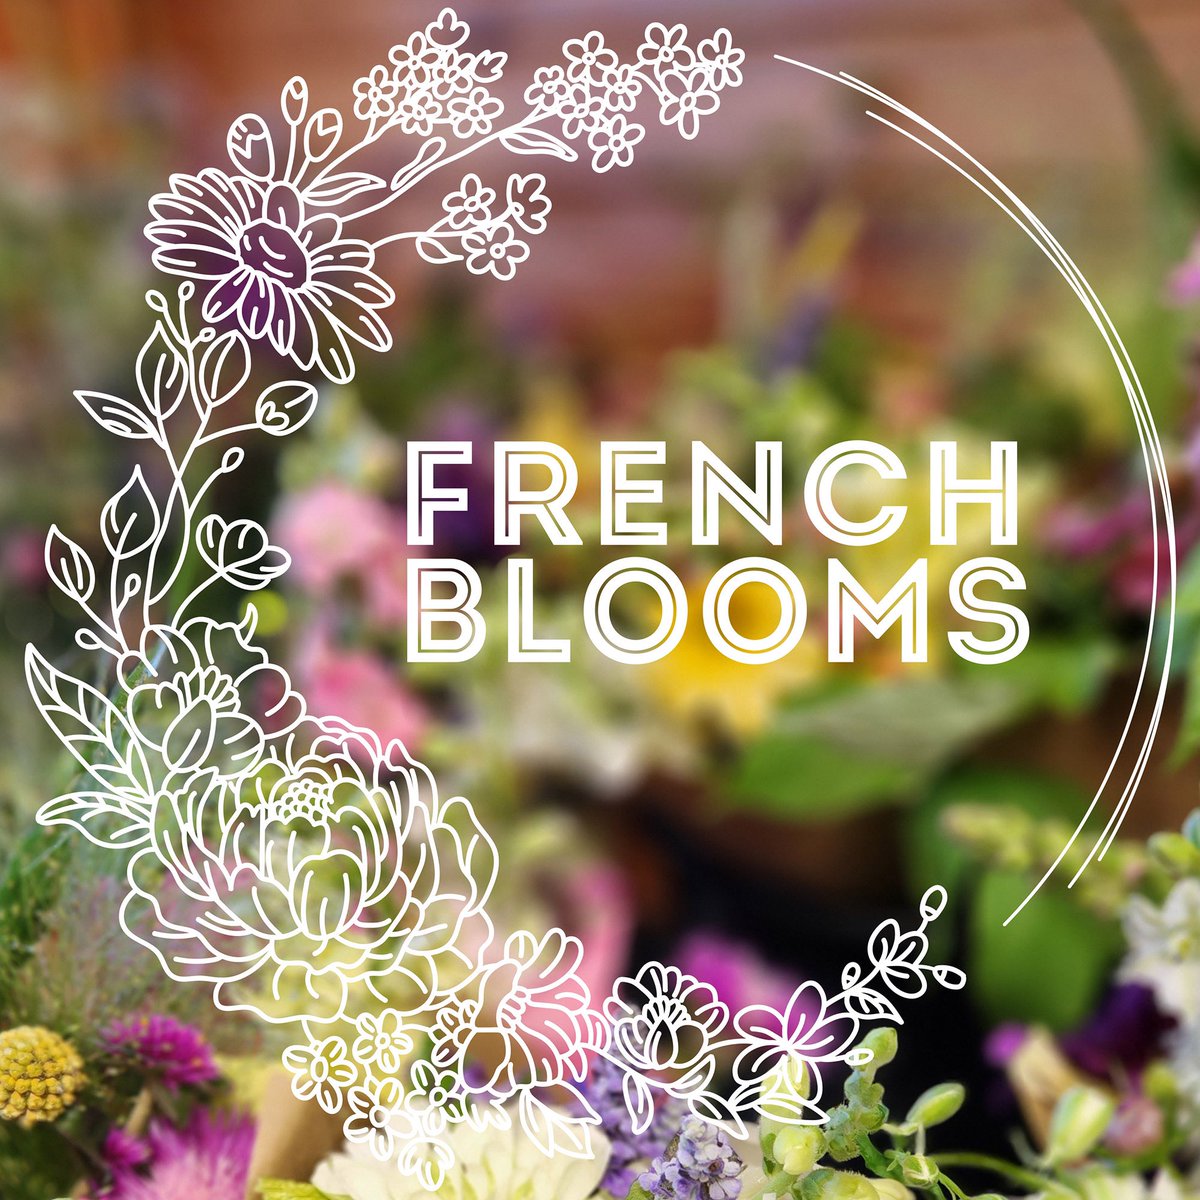 We are excited to introduce French Blooms to you!